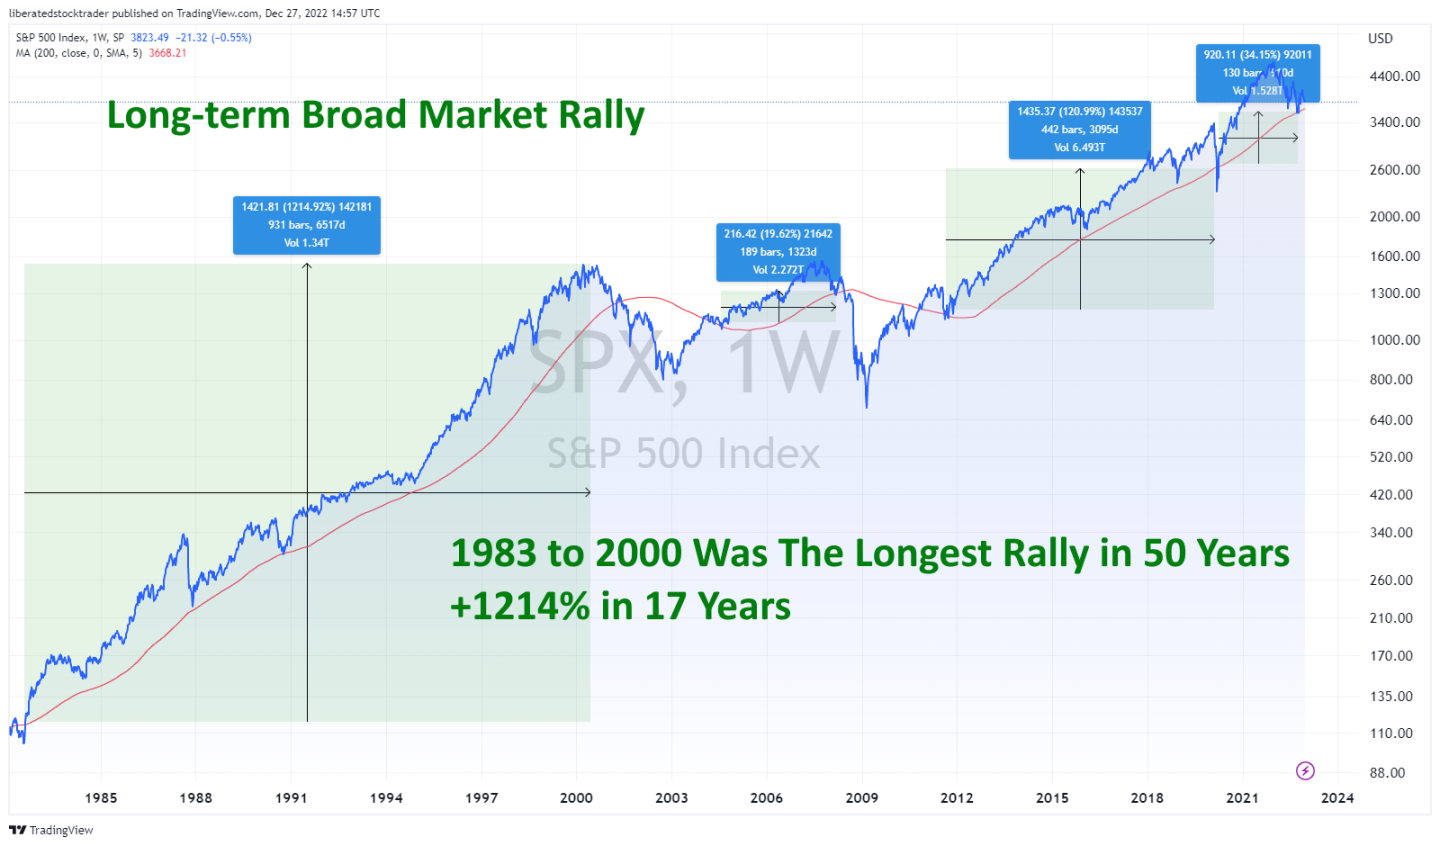 50 Years of Long-term Broad Stock Market Rallies